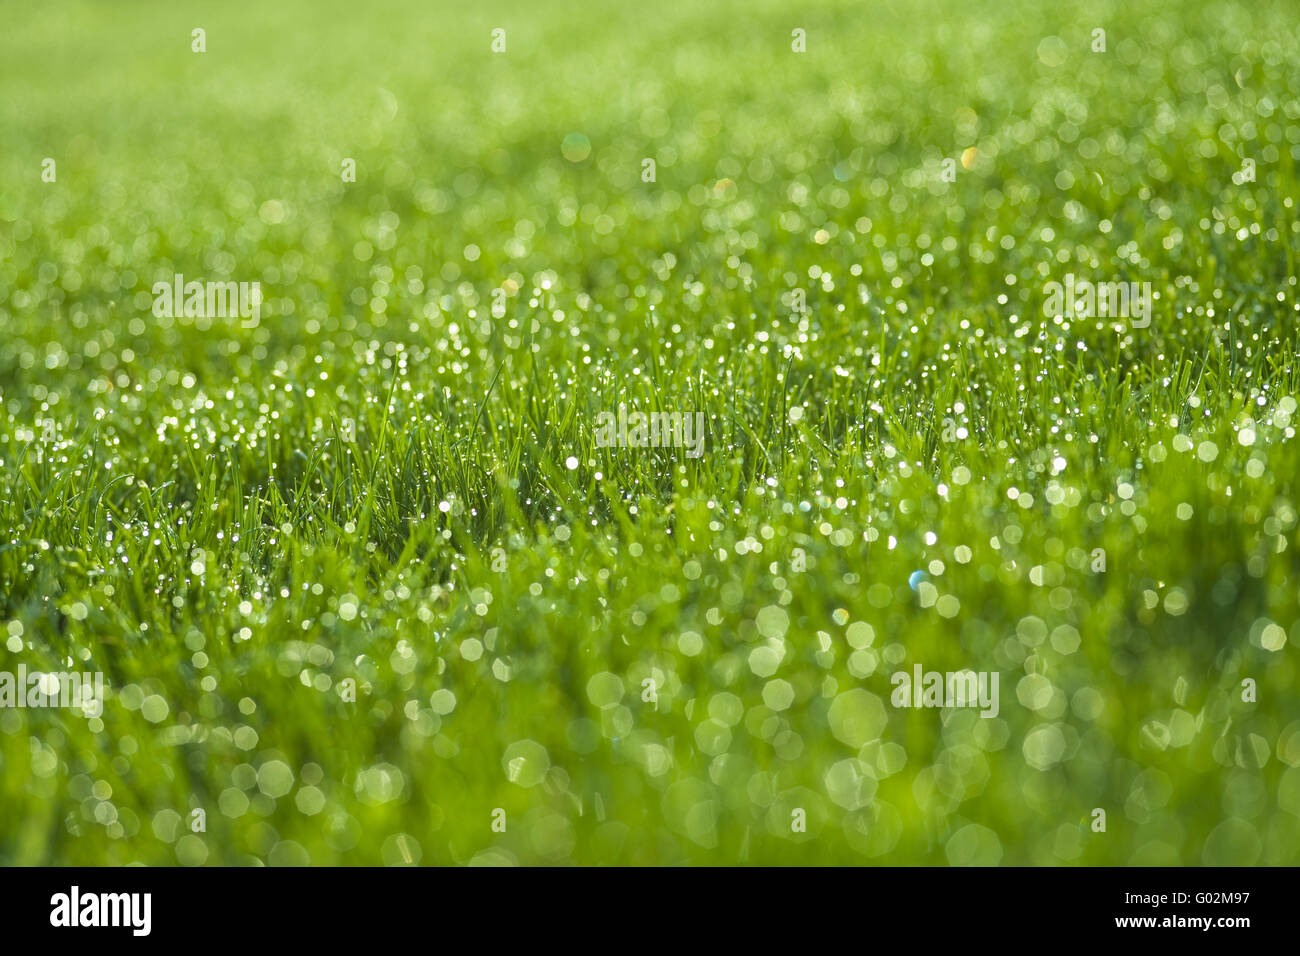 Grass meadow with rope Stock Photo